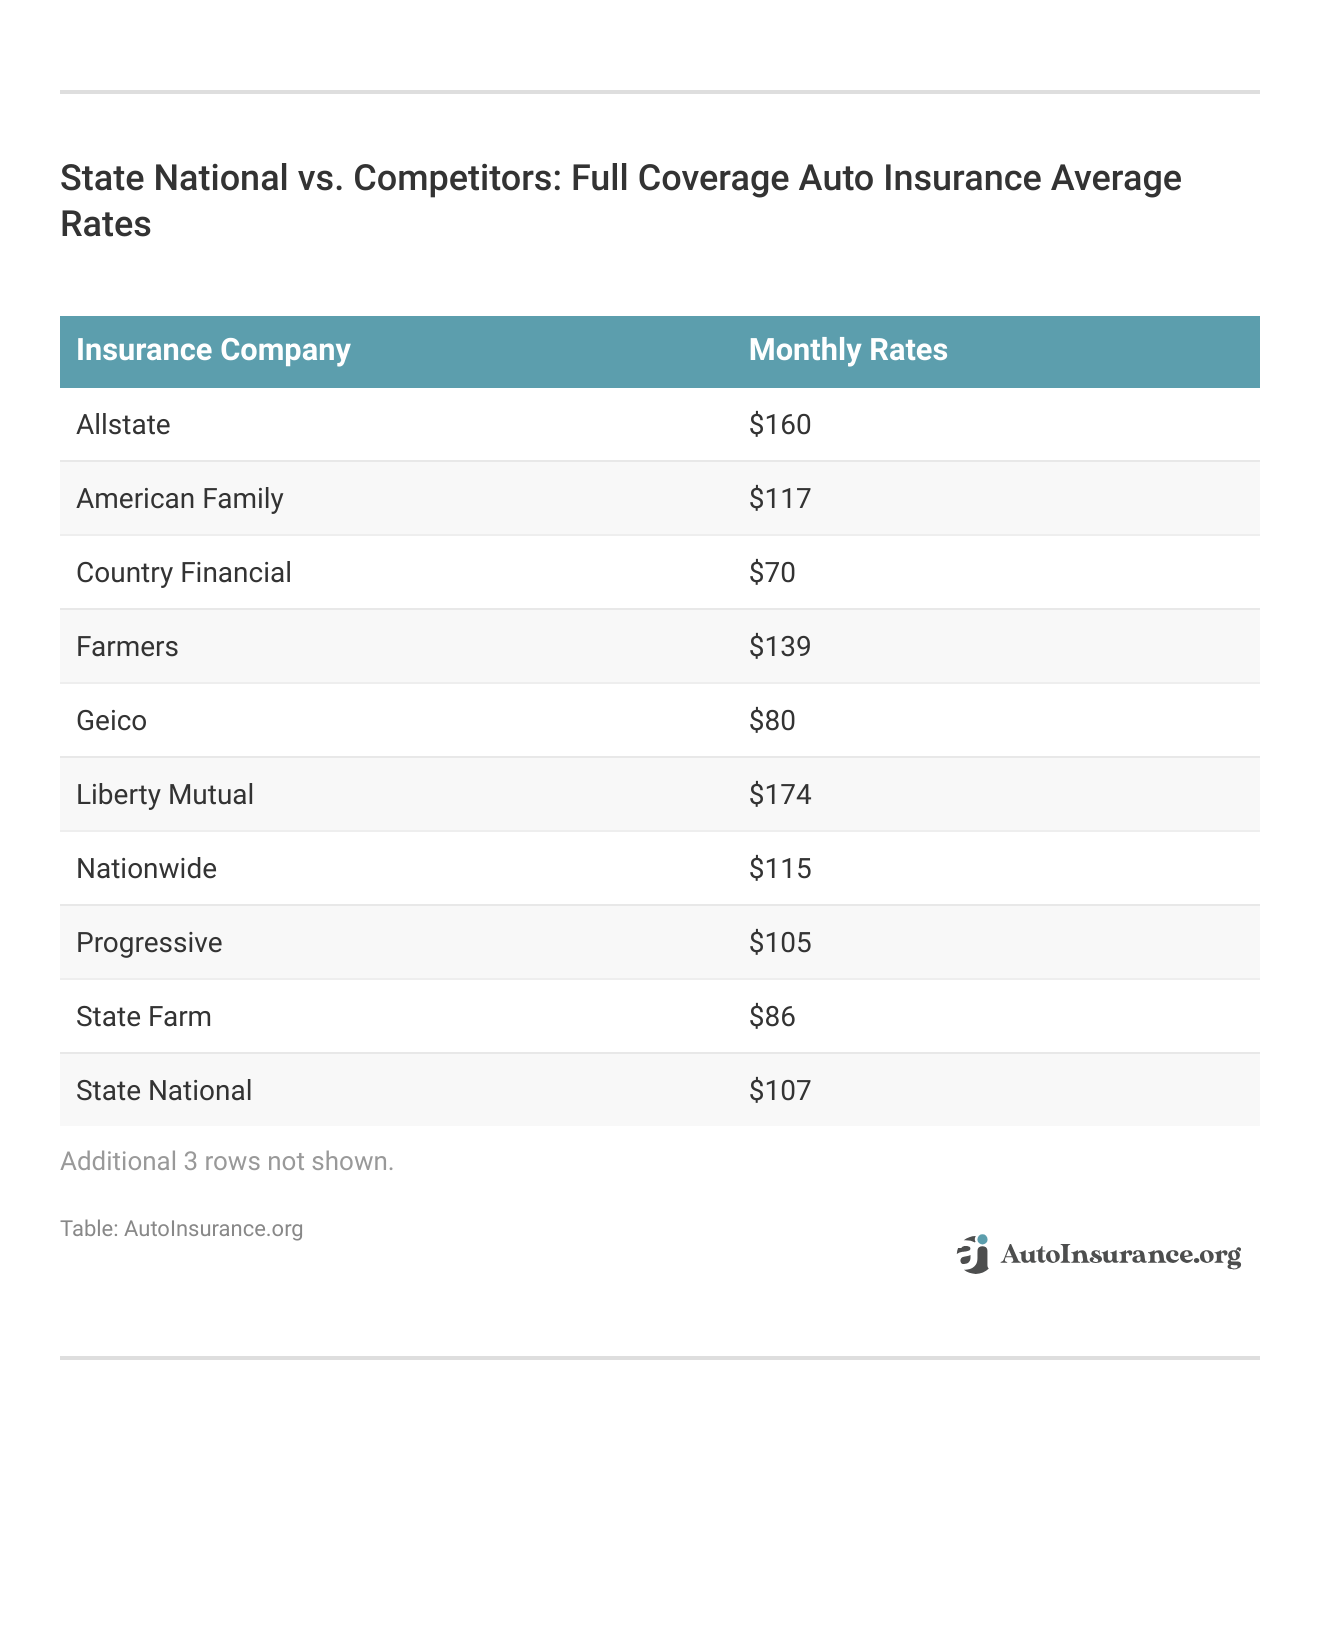 <h3>State National vs. Competitors: Full Coverage Auto Insurance Average Rates</h3>